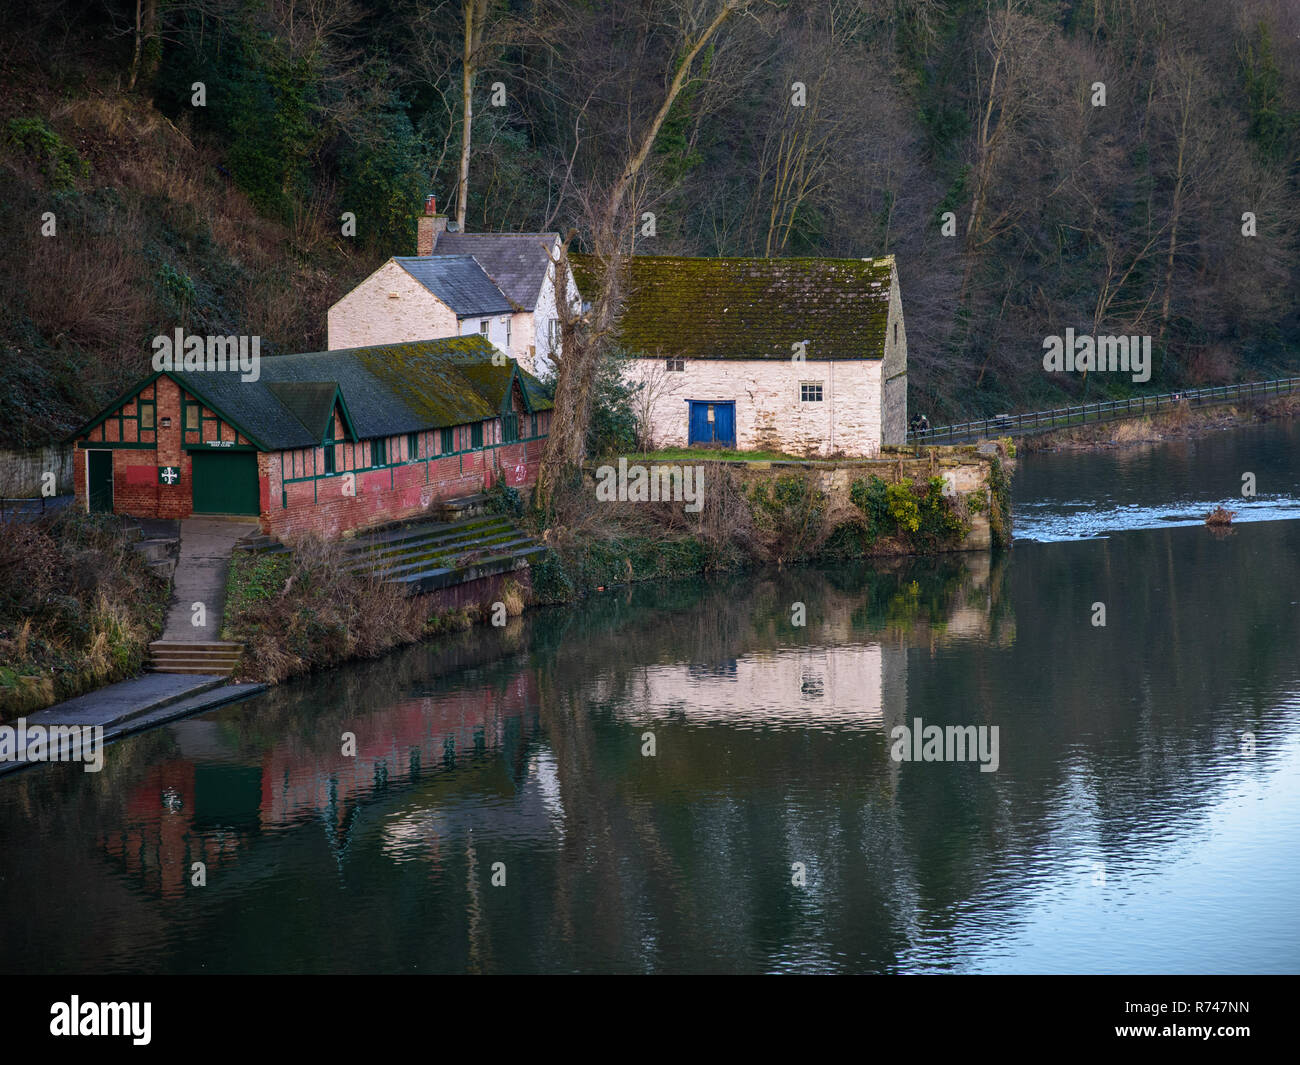 Durham, England, UK  January 29, 2017: The River Wear flows past the boathouse of Durham School's Boat Club in the steep wooded river valley through t Stock Photo